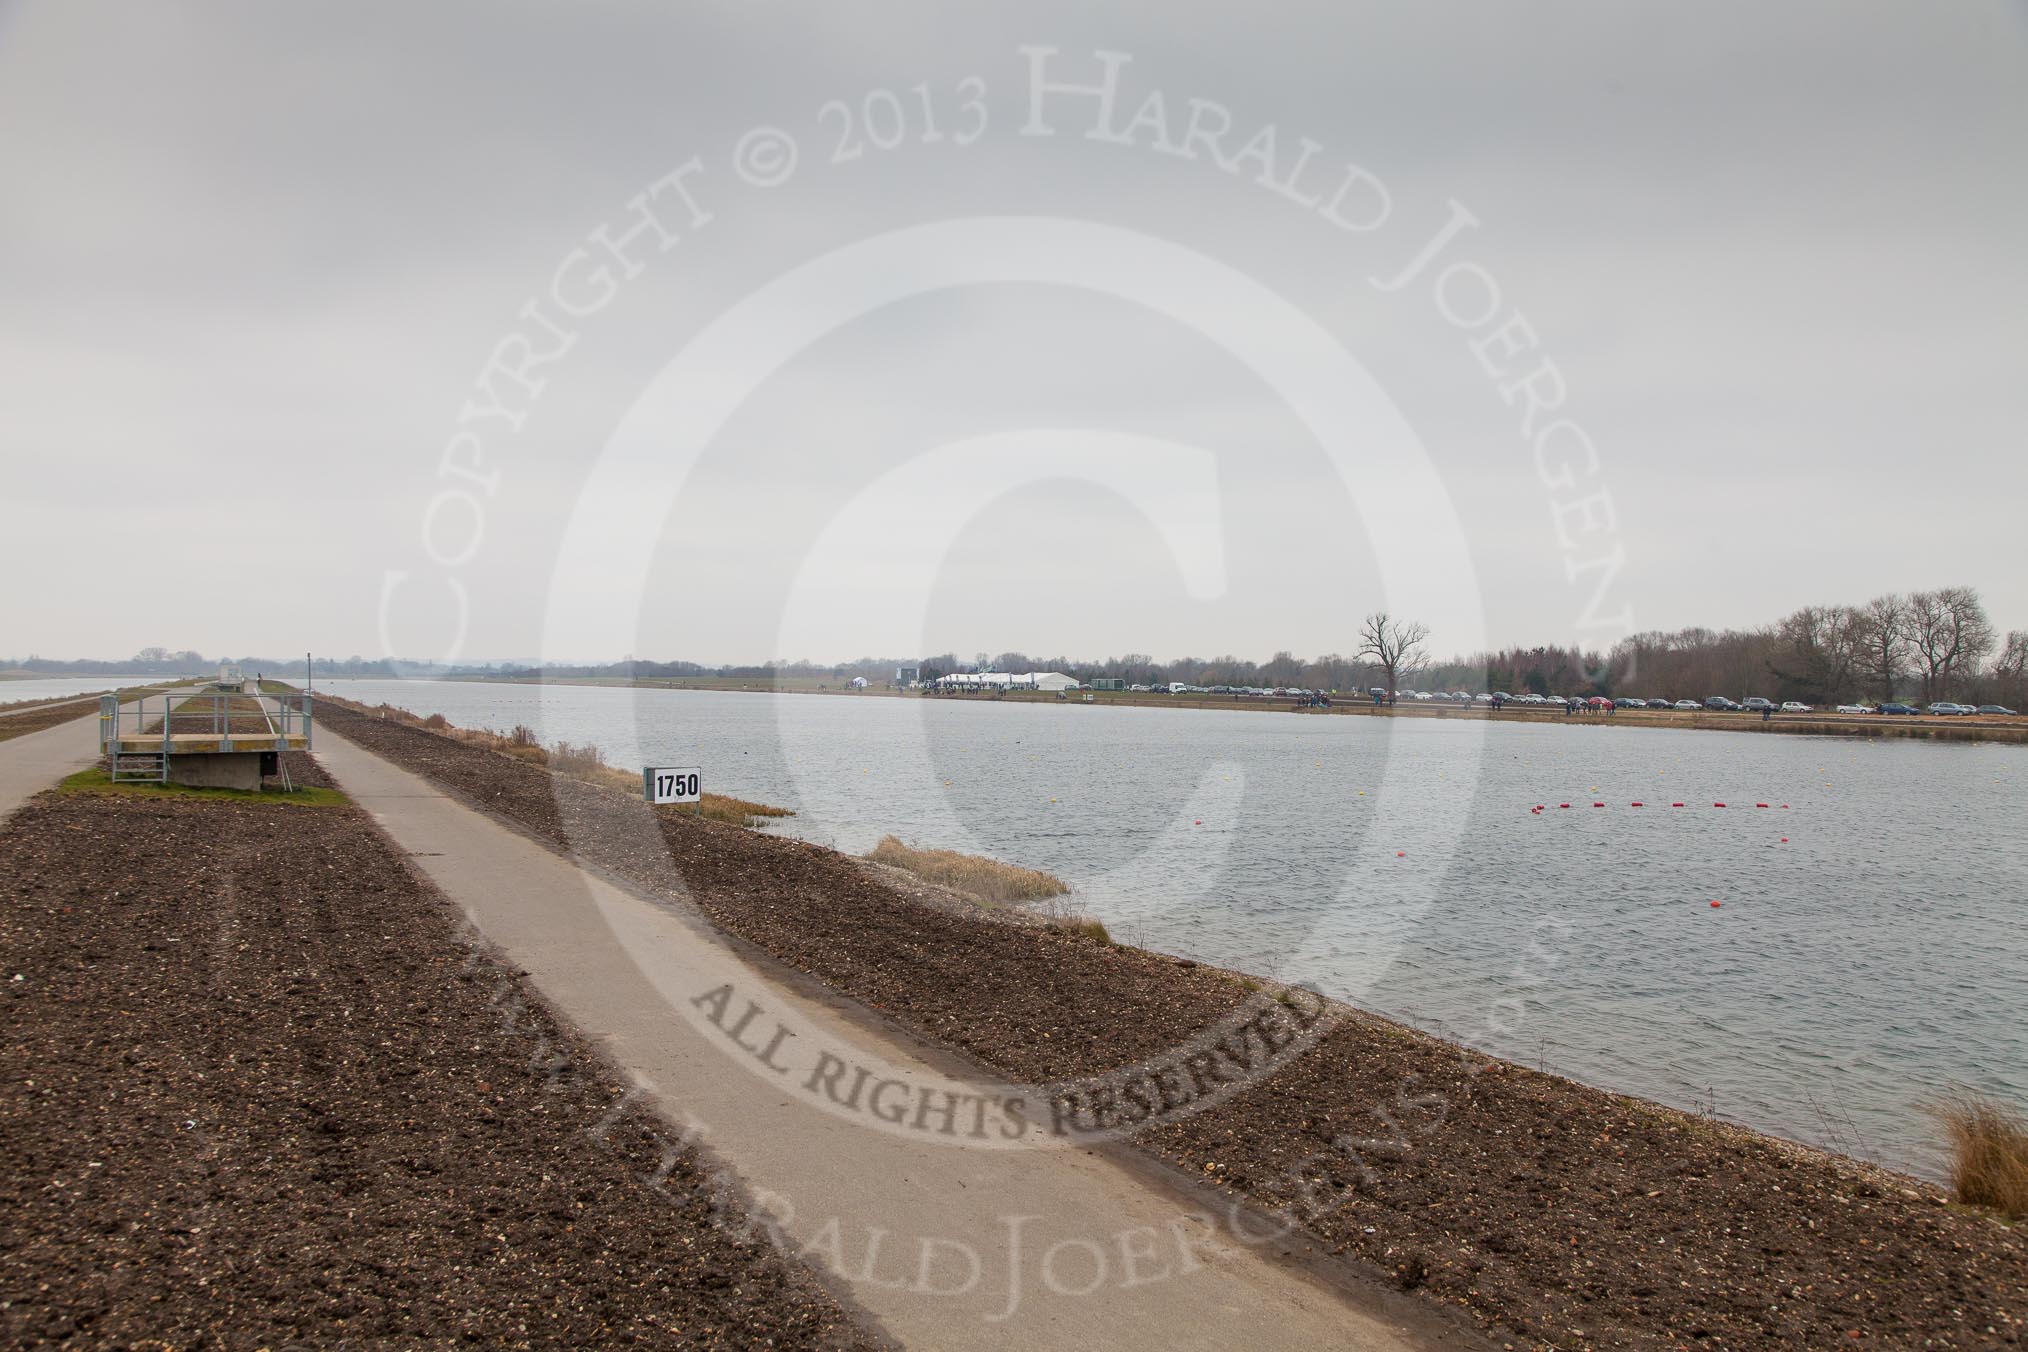 To put the photos into perspective - that's the view from the camera position towards the Dorney Lake start line, and the Newton hospitality tent on the other side of the lake.